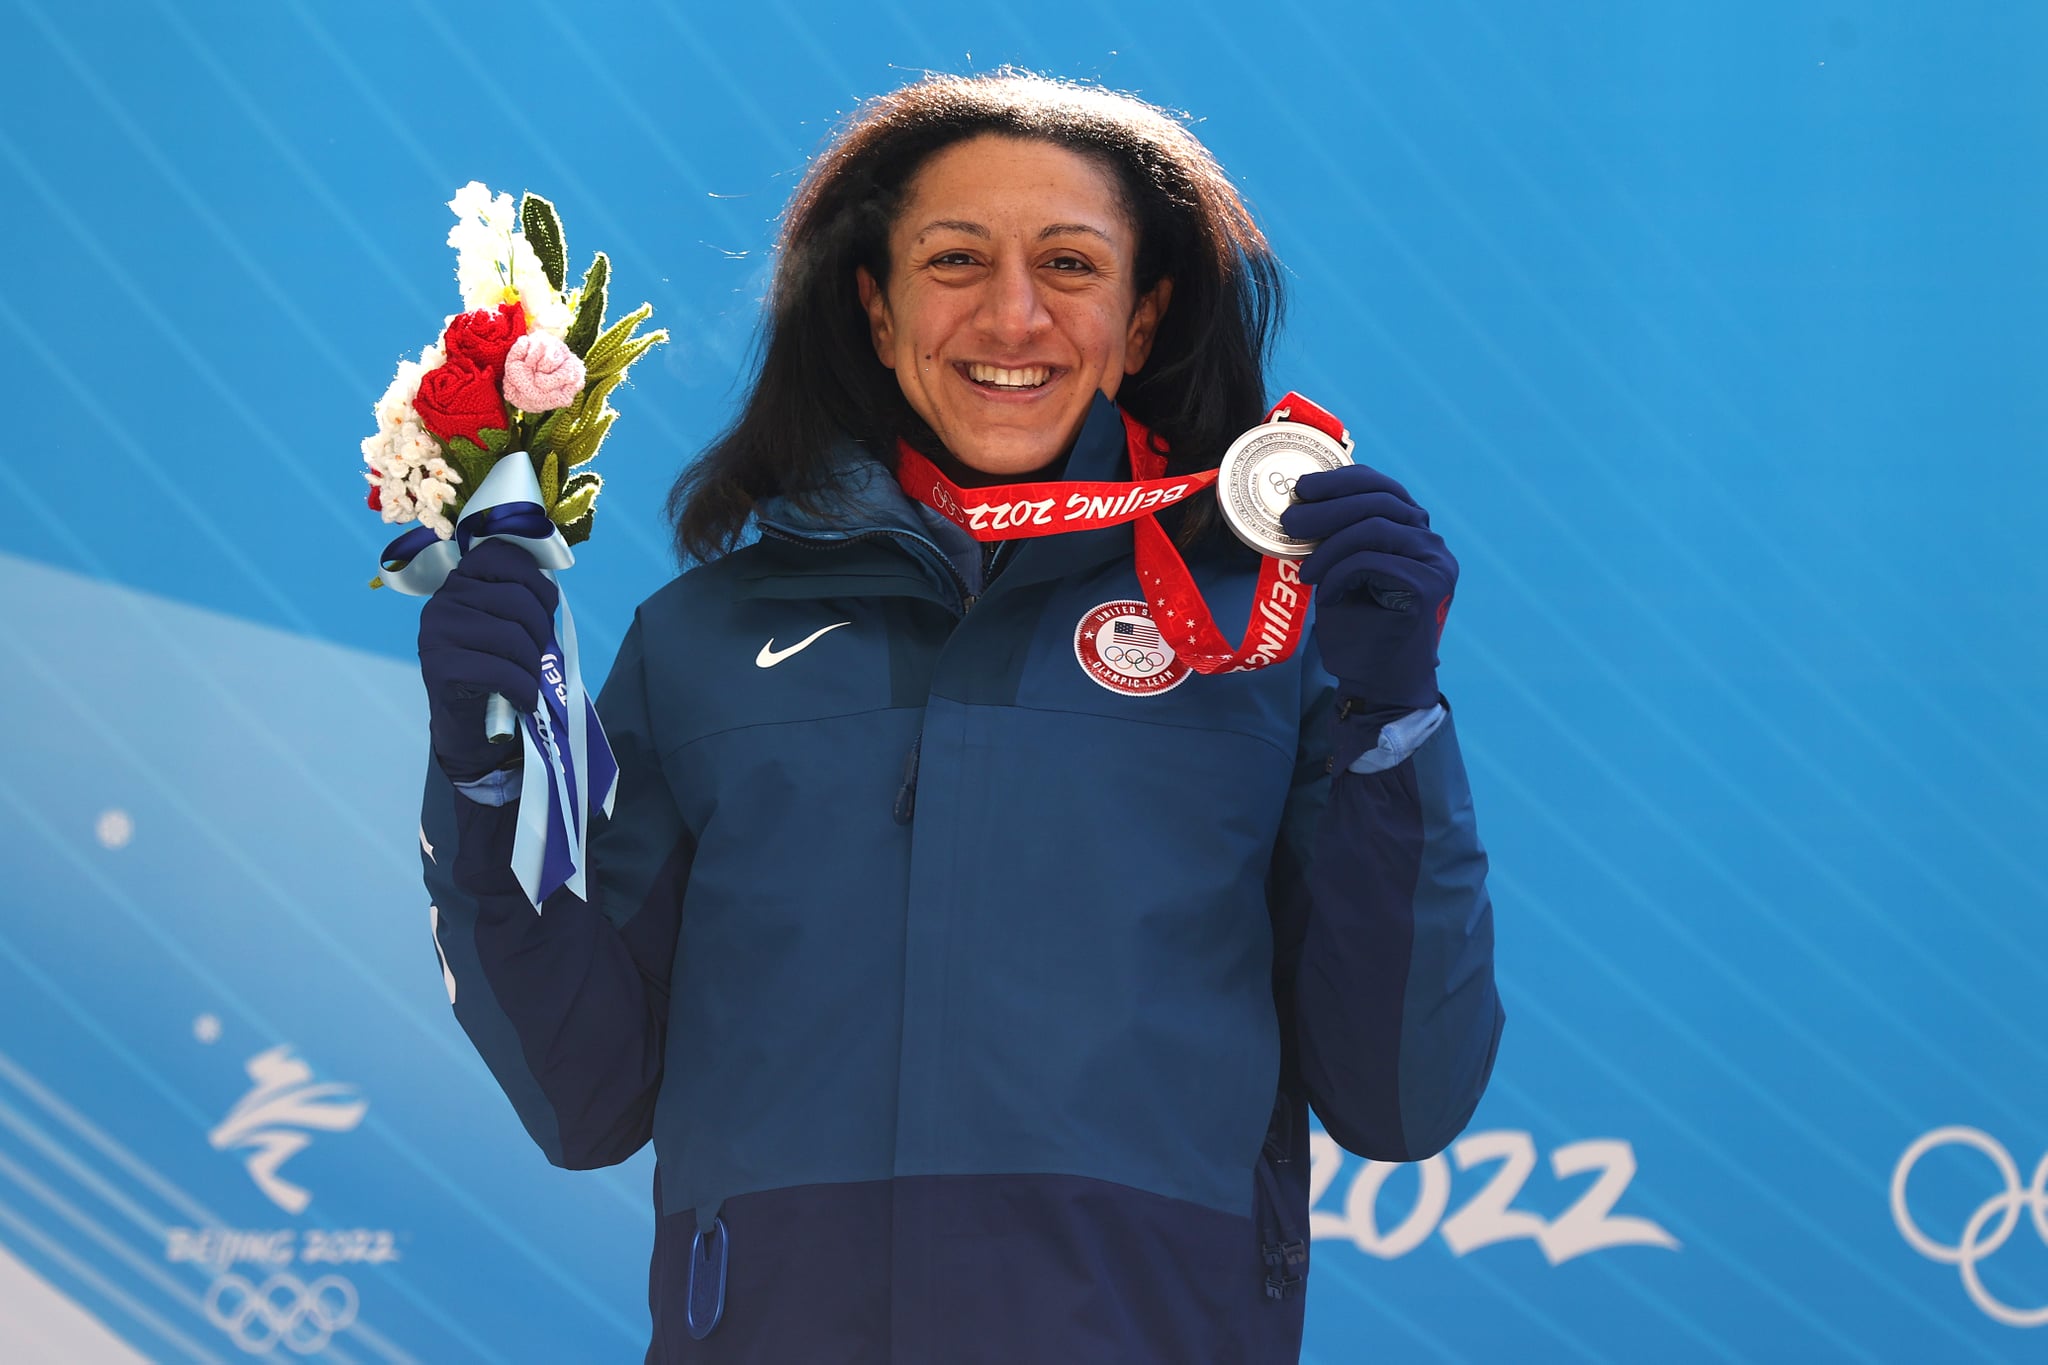 YANQING, CHINA - FEBRUARY 14:  Silver medallist Elana Meyers Taylor of Team United States poses during the Women's Monobob Bobsleigh medal ceremony on day 10 of Beijing 2022 Winter Olympic Games at National Sliding Centre on February 14, 2022 in Yanqing, China. (Photo by Julian Finney/Getty Images)